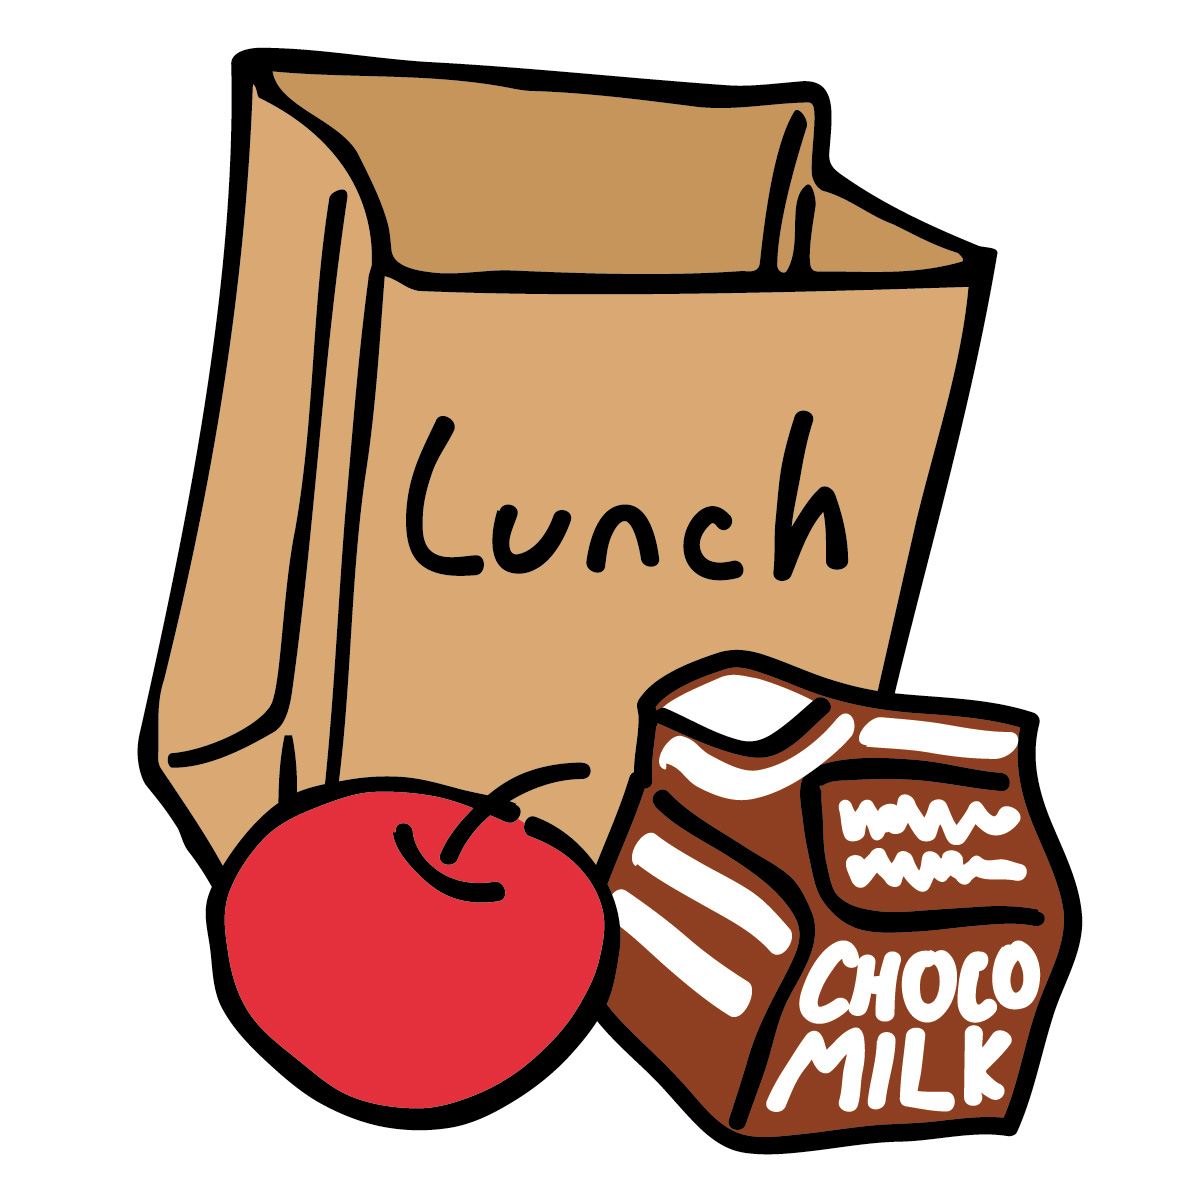 Lunch Clipart | Clipart Panda - Free Clipart Images